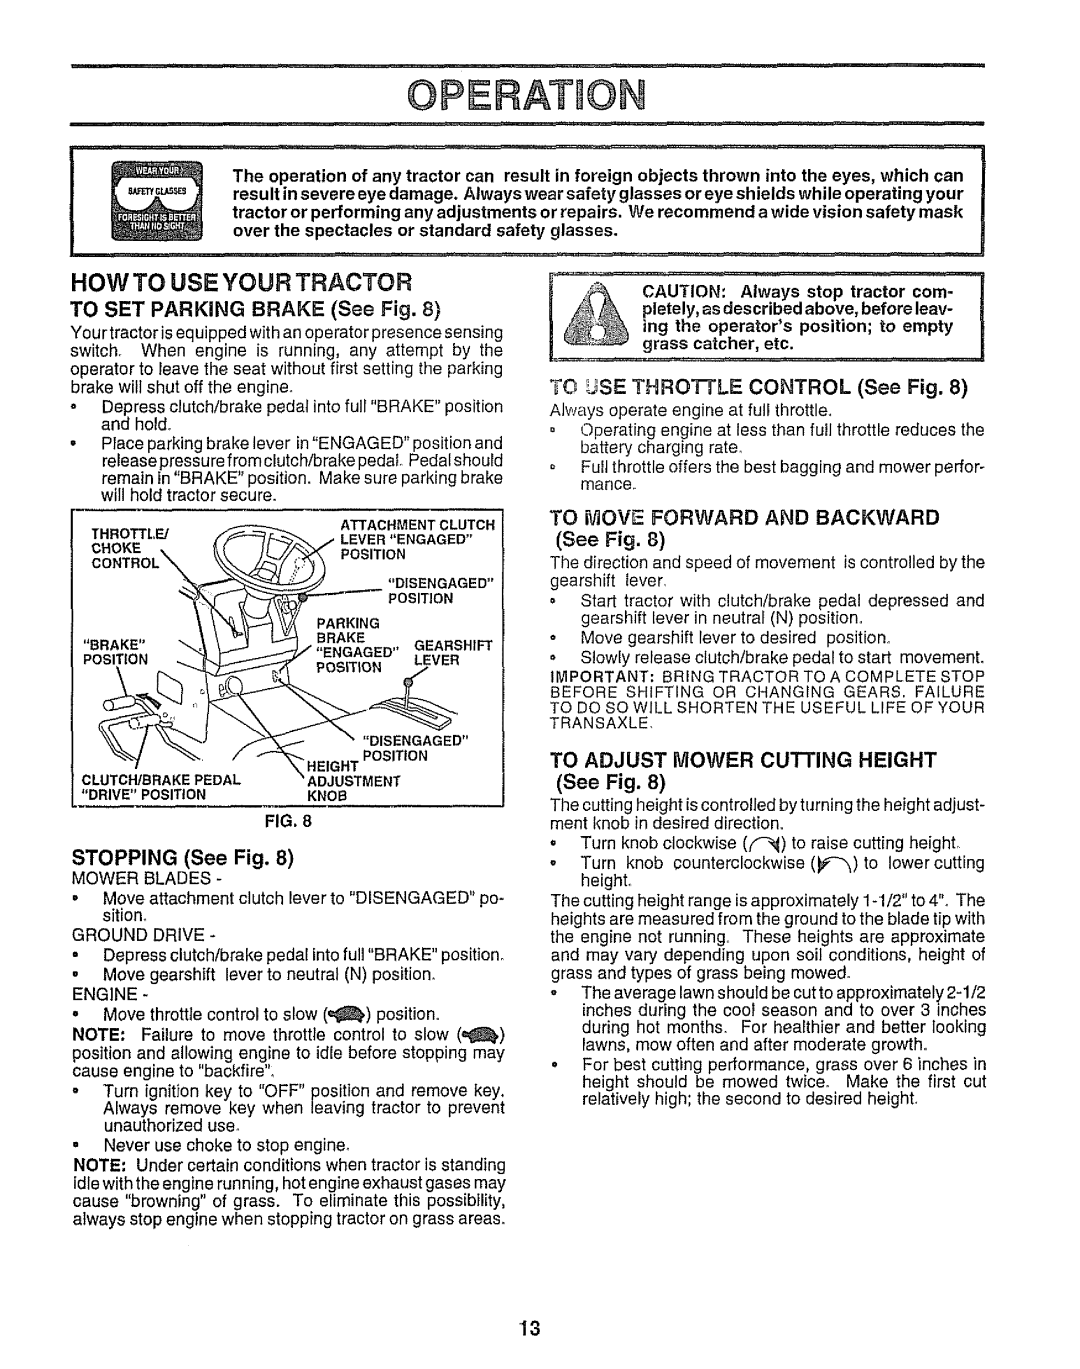 Sears 917.25958 manual OPERATaON, How To Use Your Tractor 